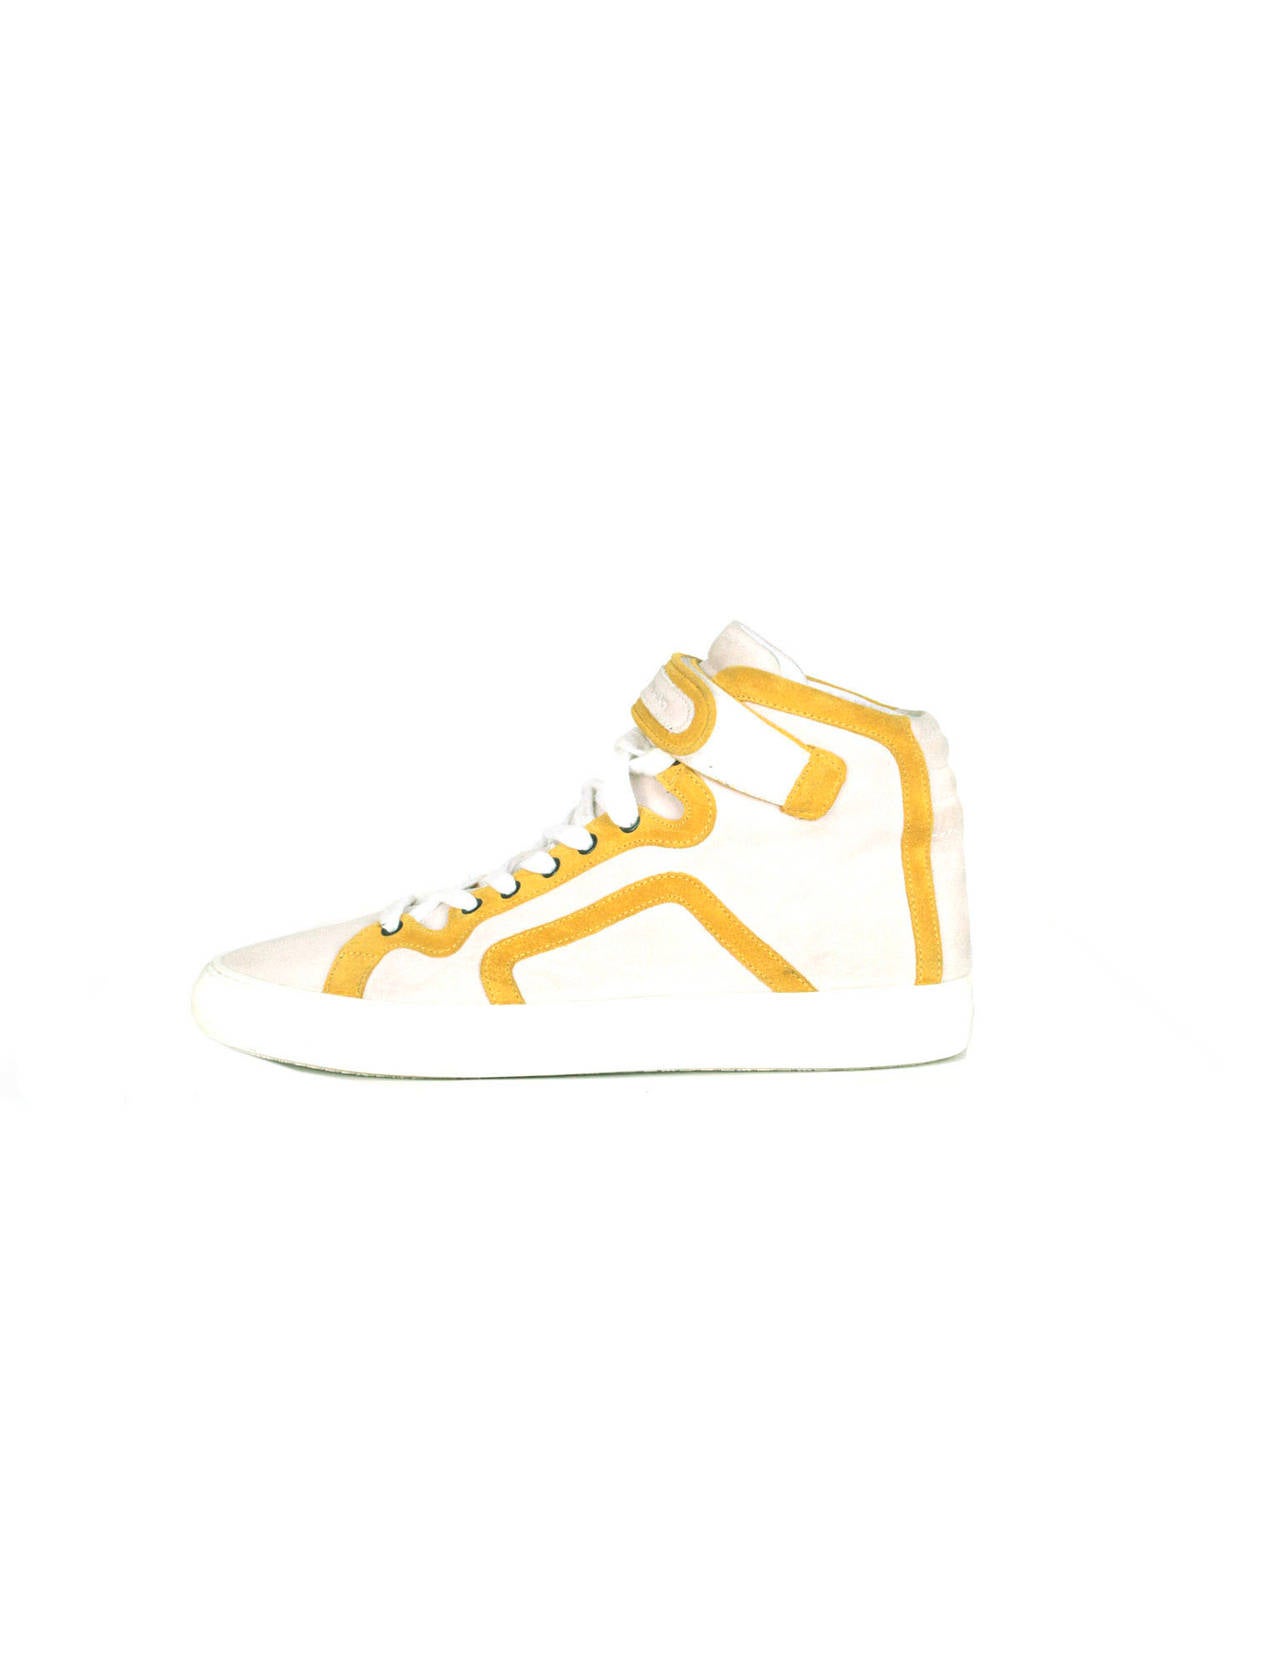 Women's Pierre Hardy Montantes high-top sneakers in color-blocked eggshell suede